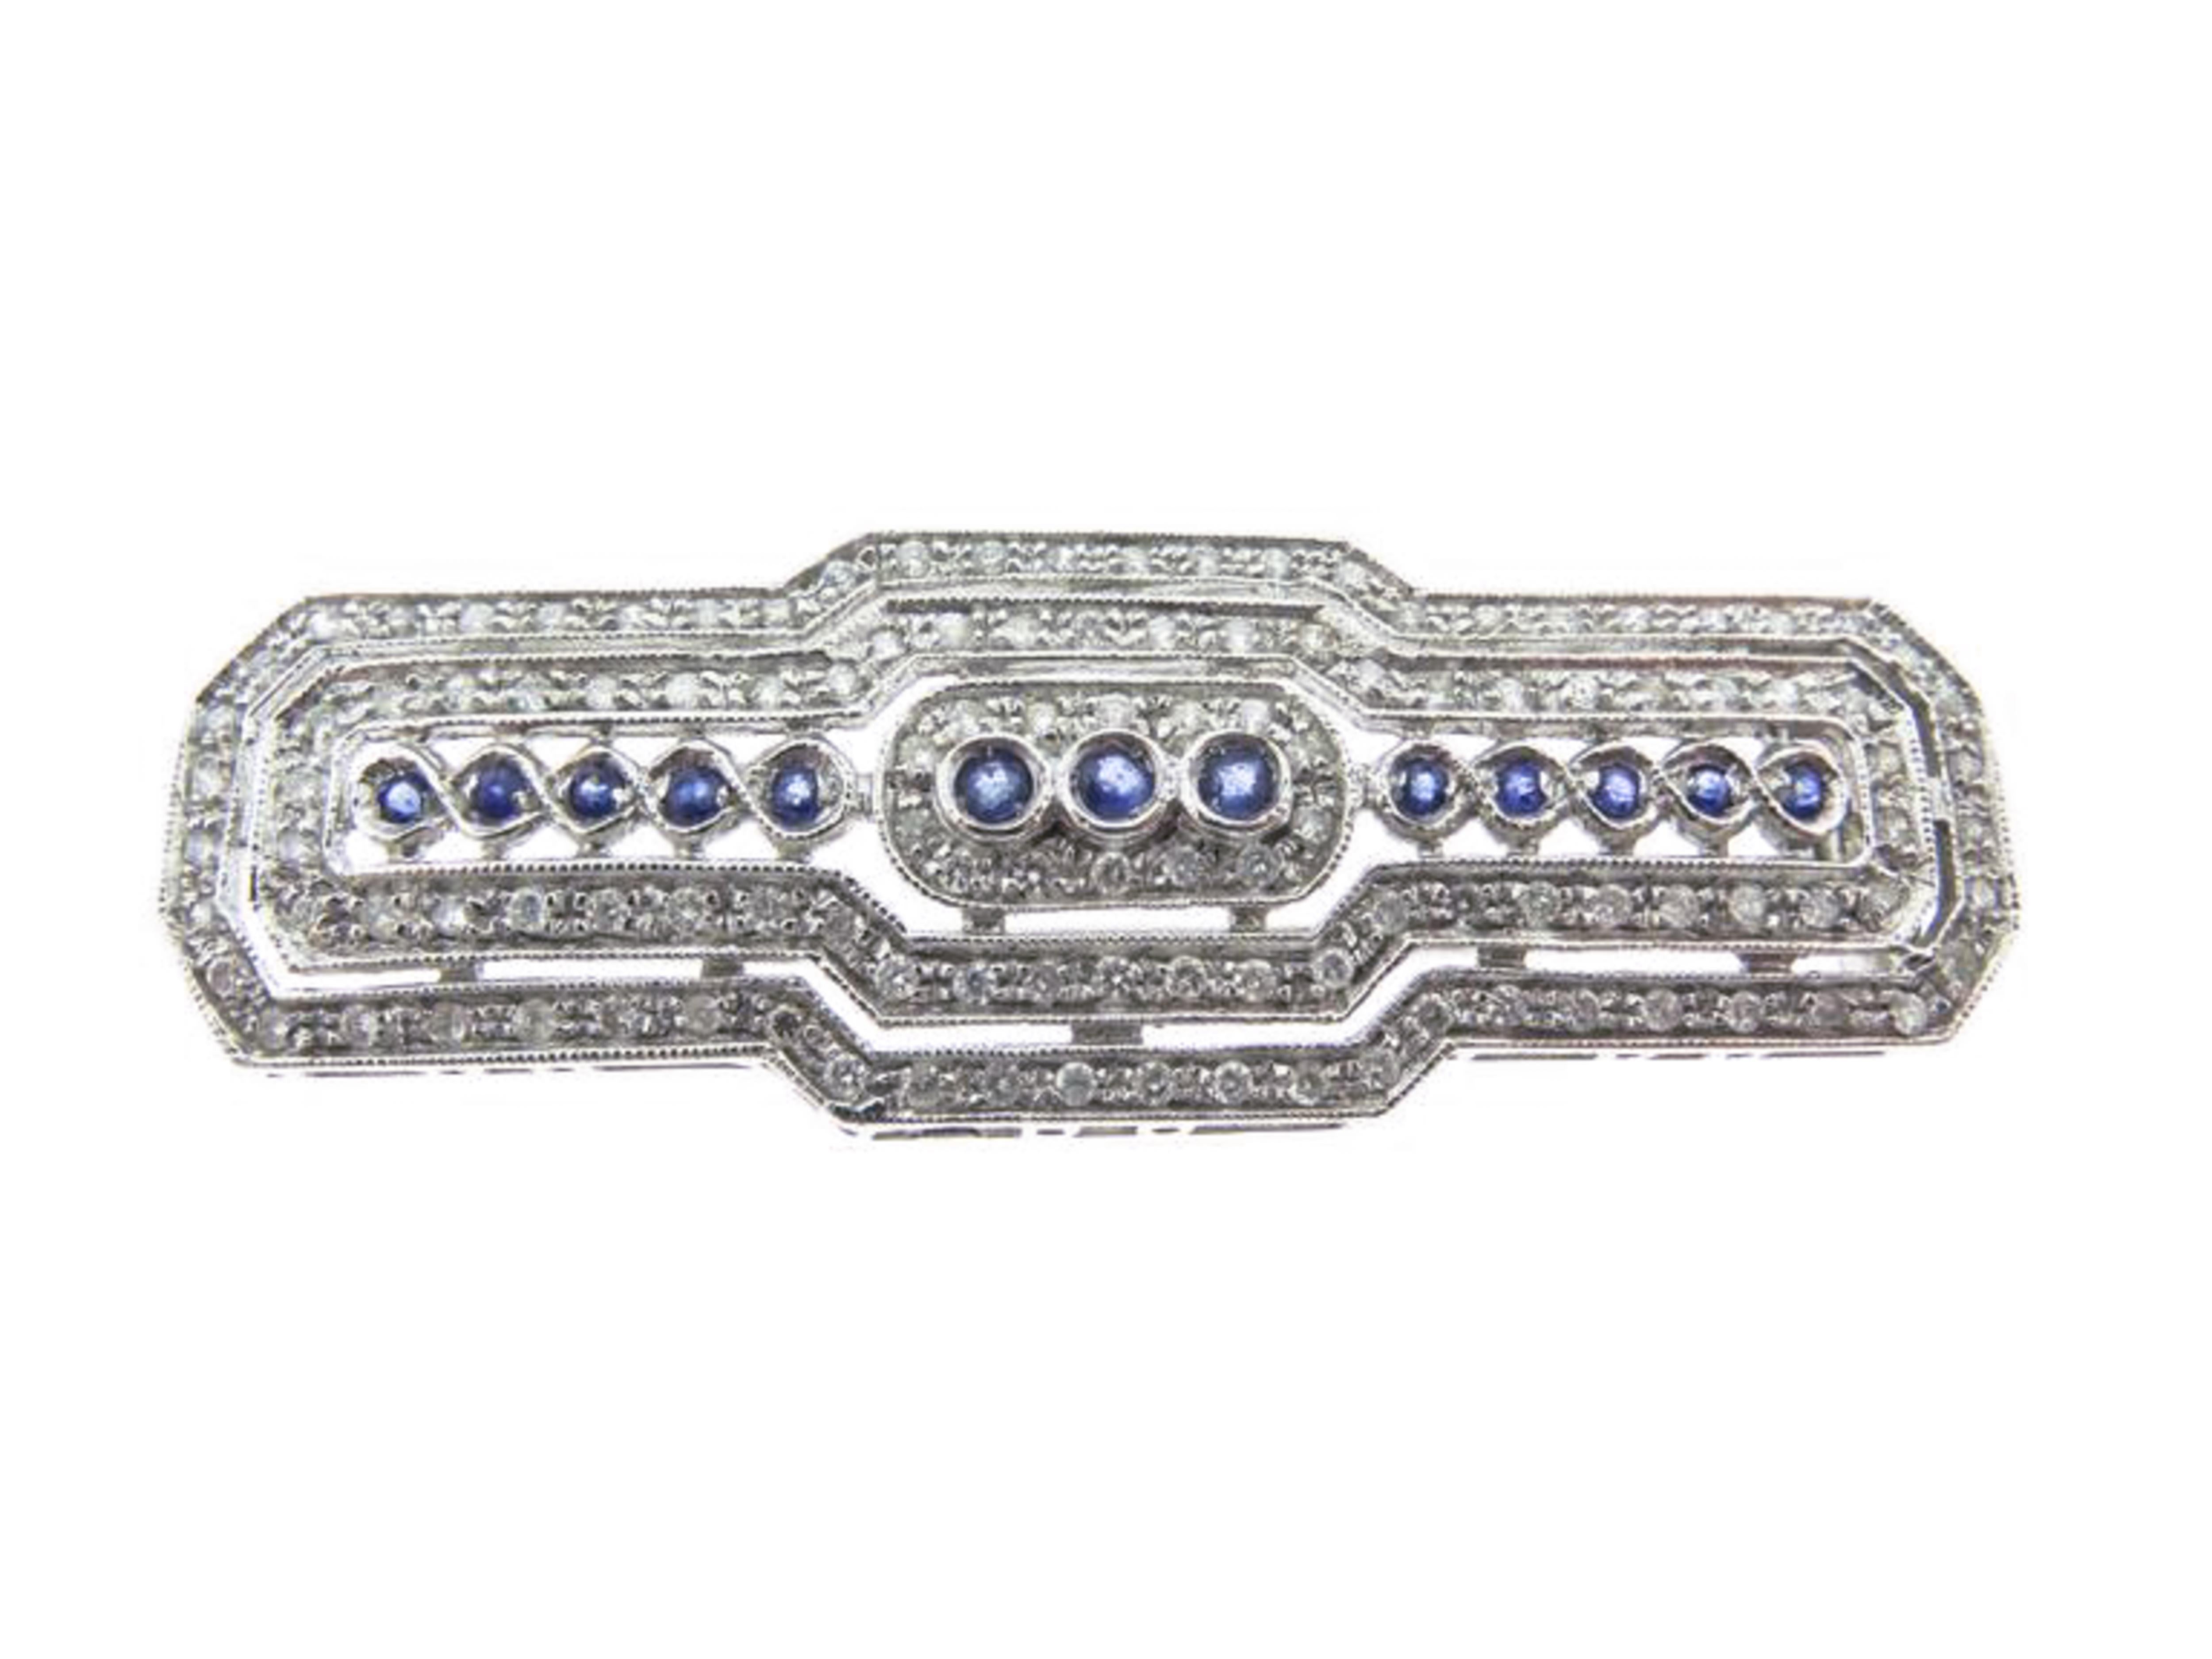 The white gold brooch is beautifully decorated with diamonds, the amount in carat is over 1.40 carat, at the center is a line of 13 natural sapphires weighing 0.50 carat. The design is classic Art Deco style. Gorgeous architecture and platinum